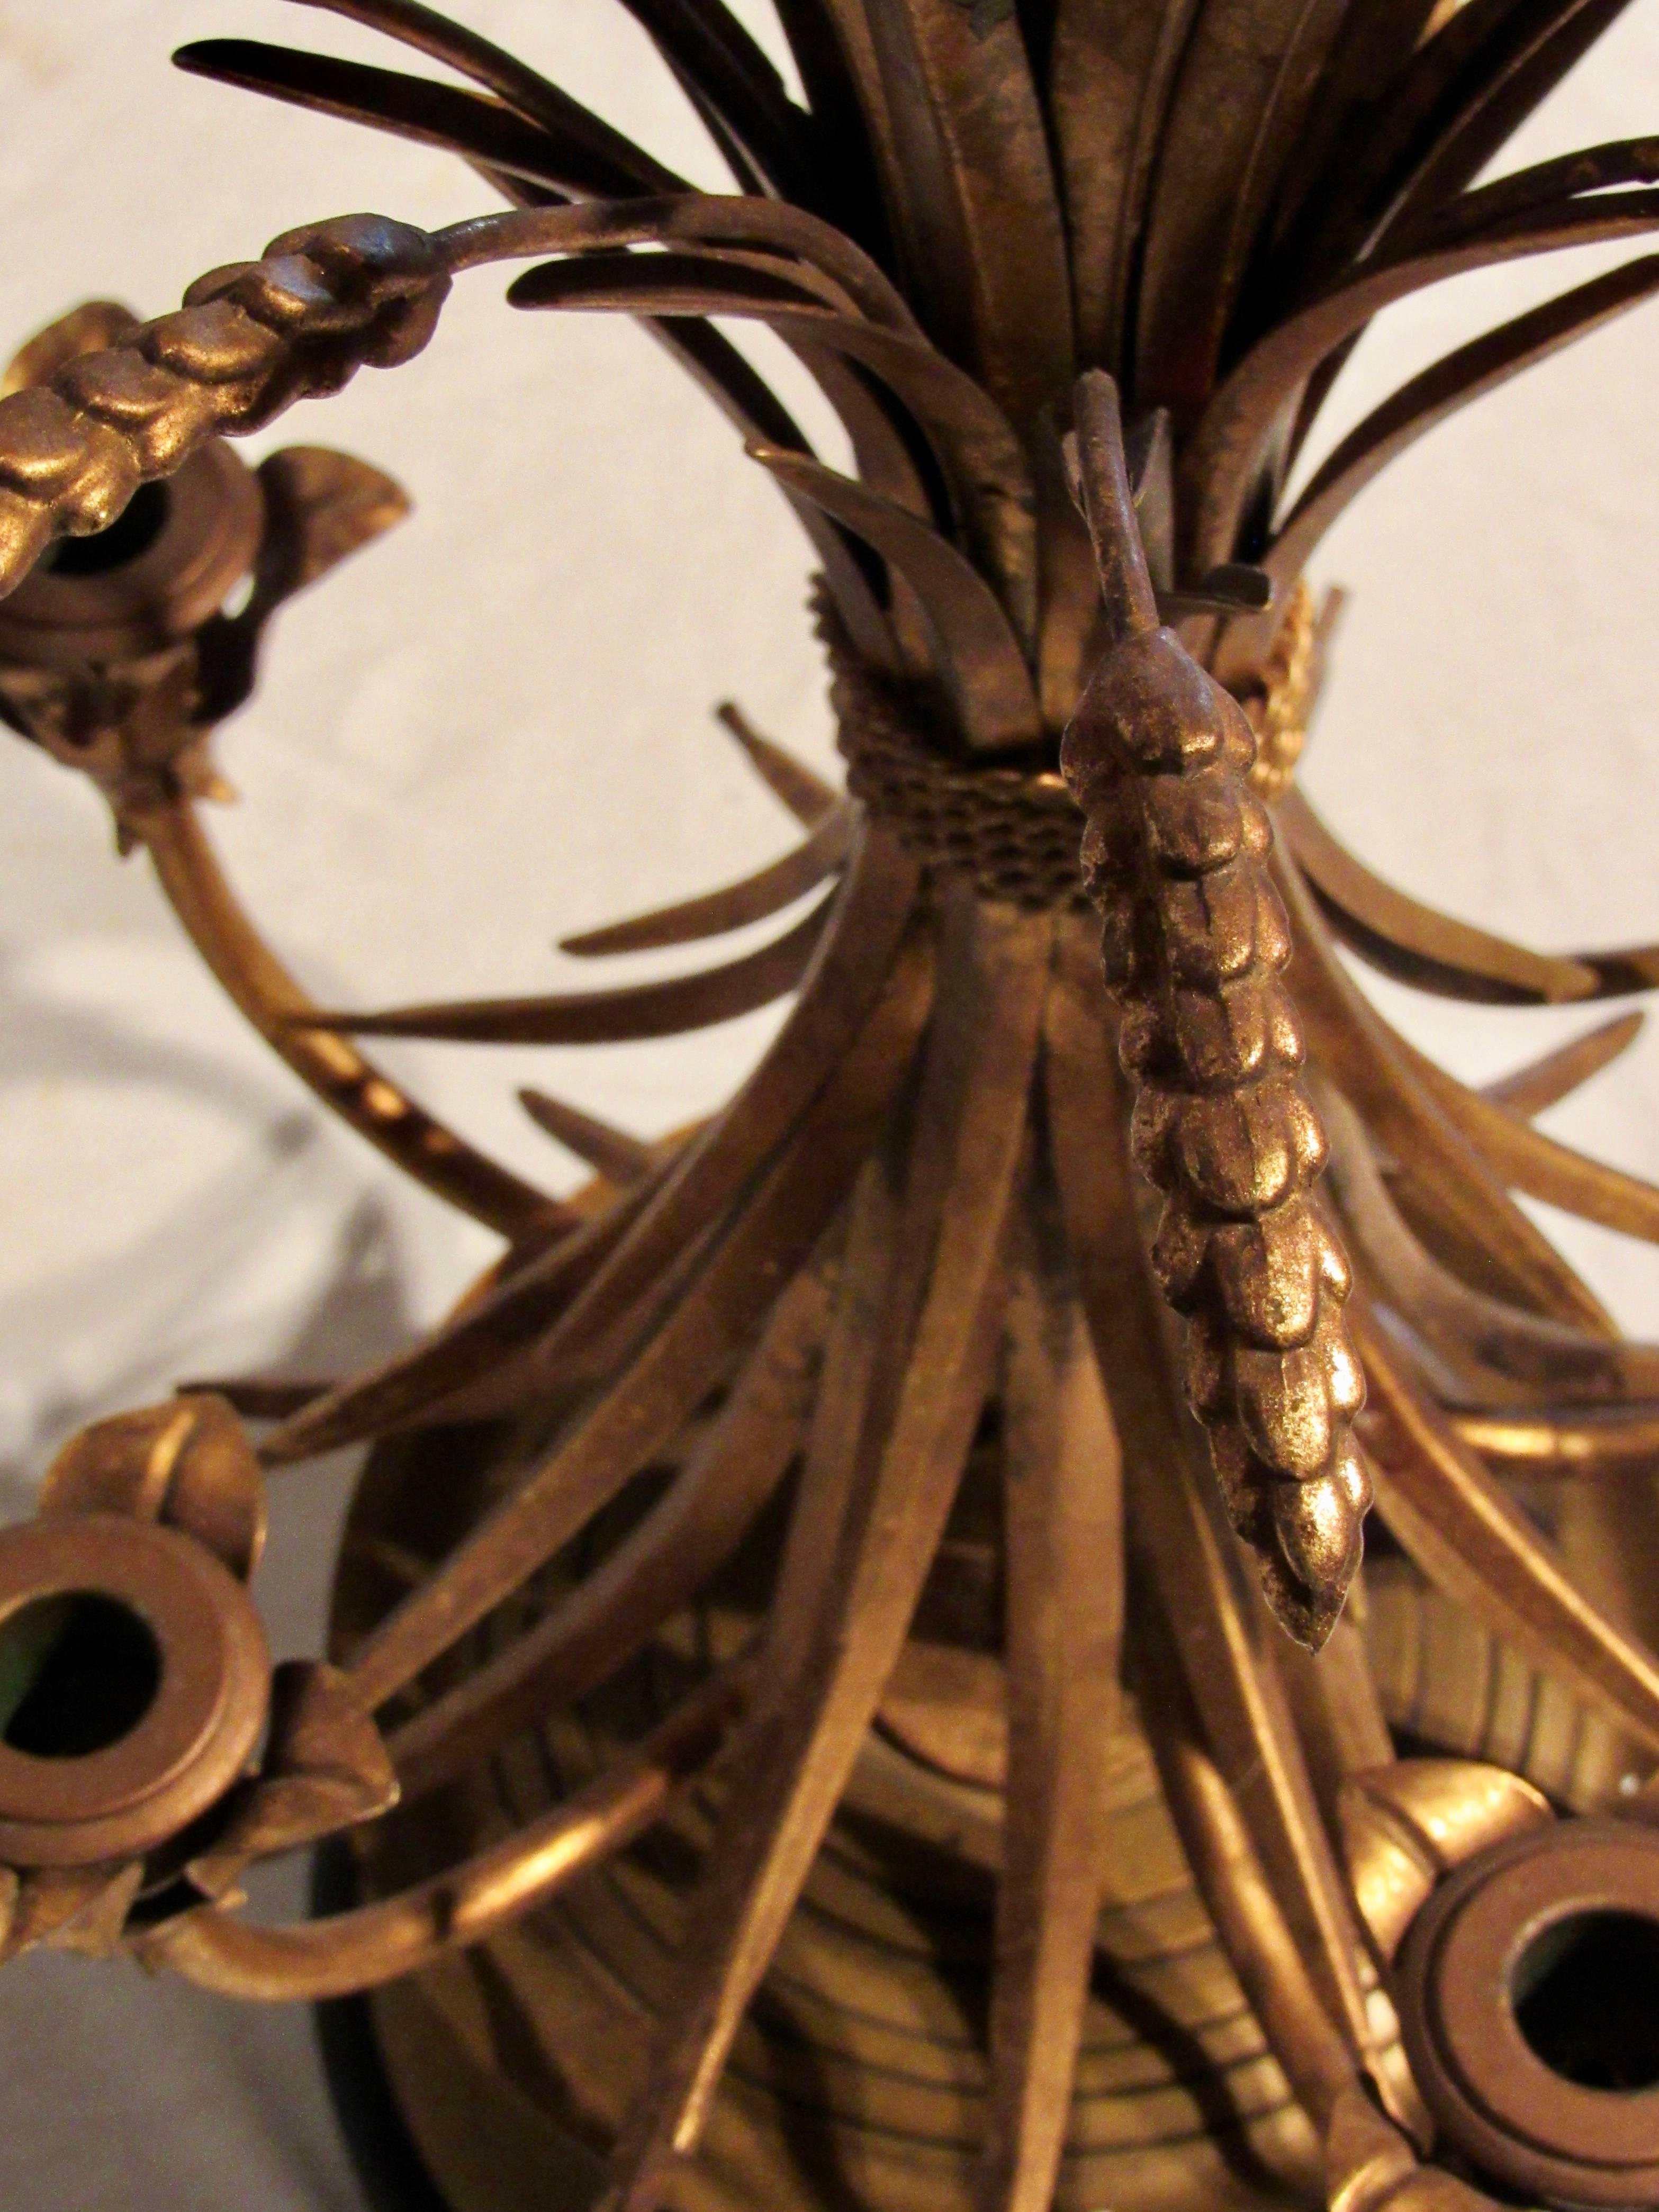 Mid-20th Century Neoclassic Gilt Sheaf of Wheat Candelabra Table Lamp Frederick Cooper For Sale